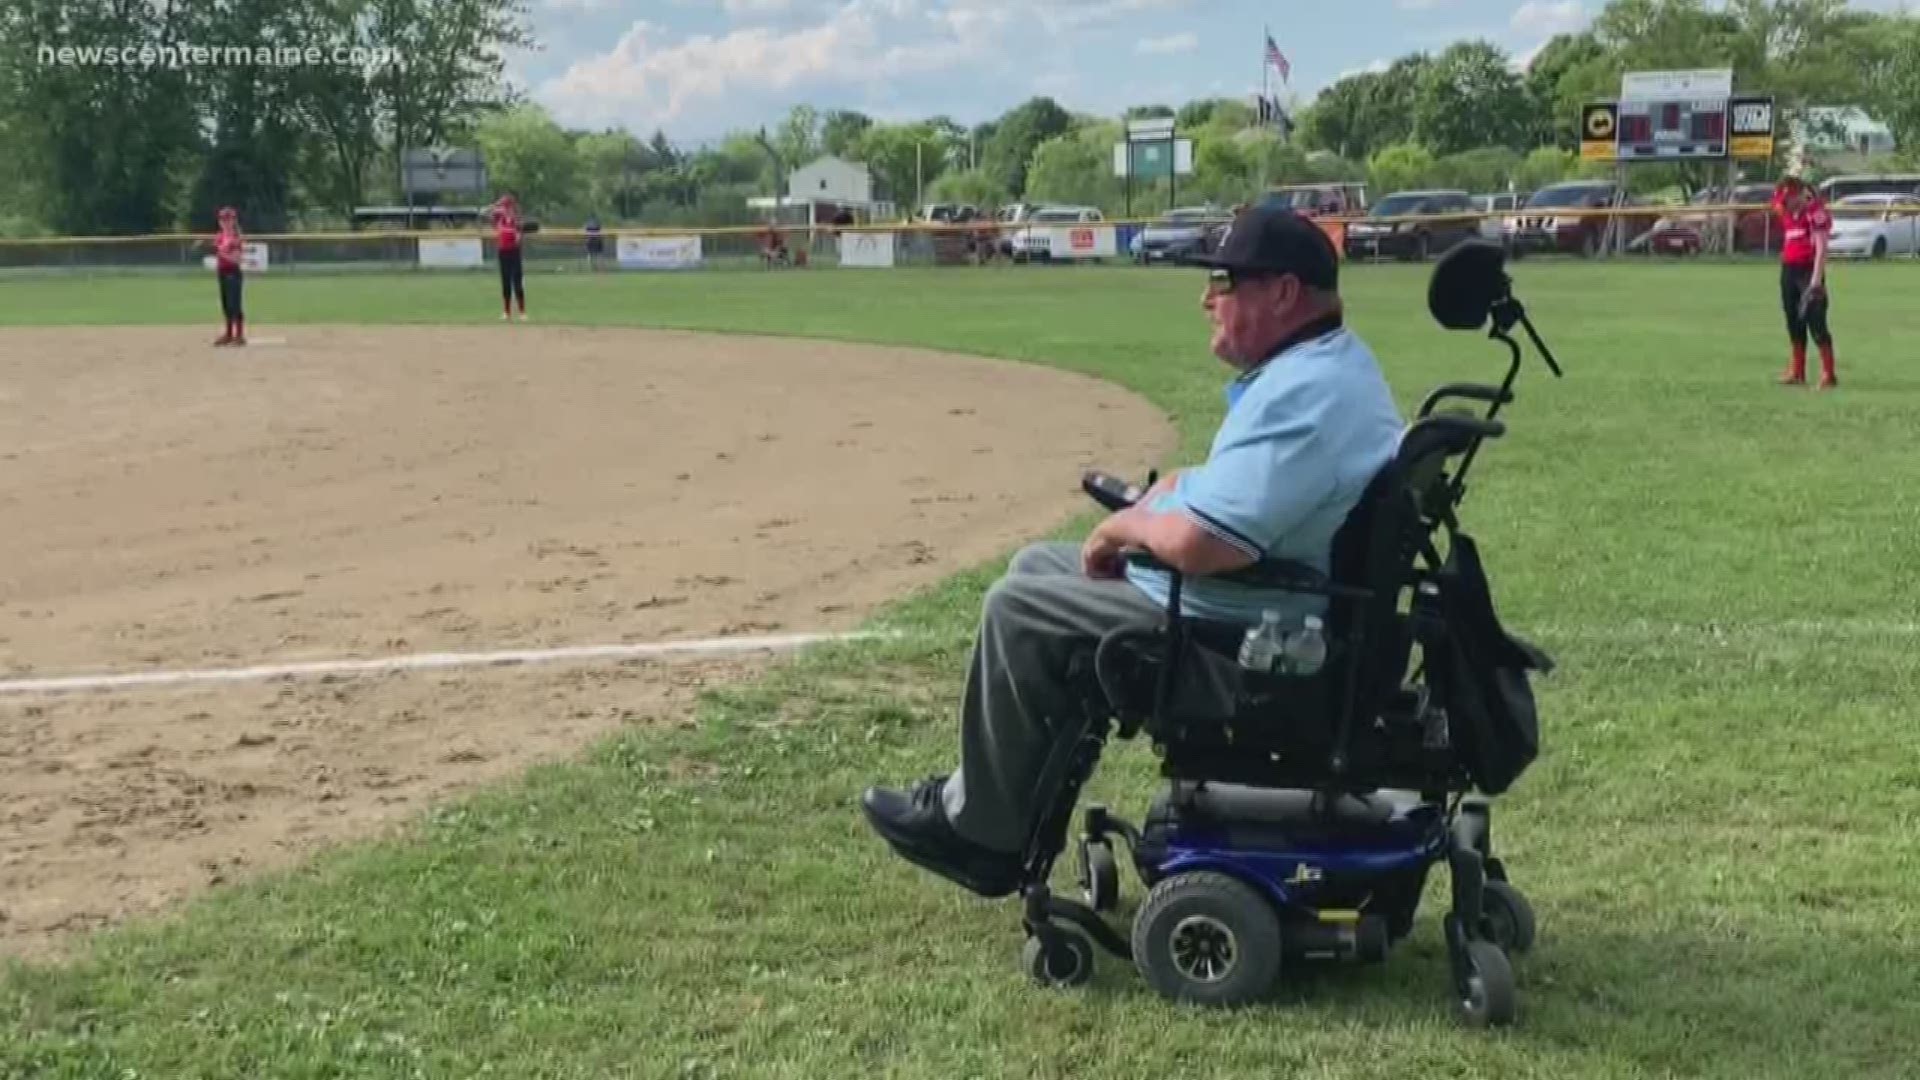 Jaimie Erskine is the first umpire ever to work first base while using a wheelchair.